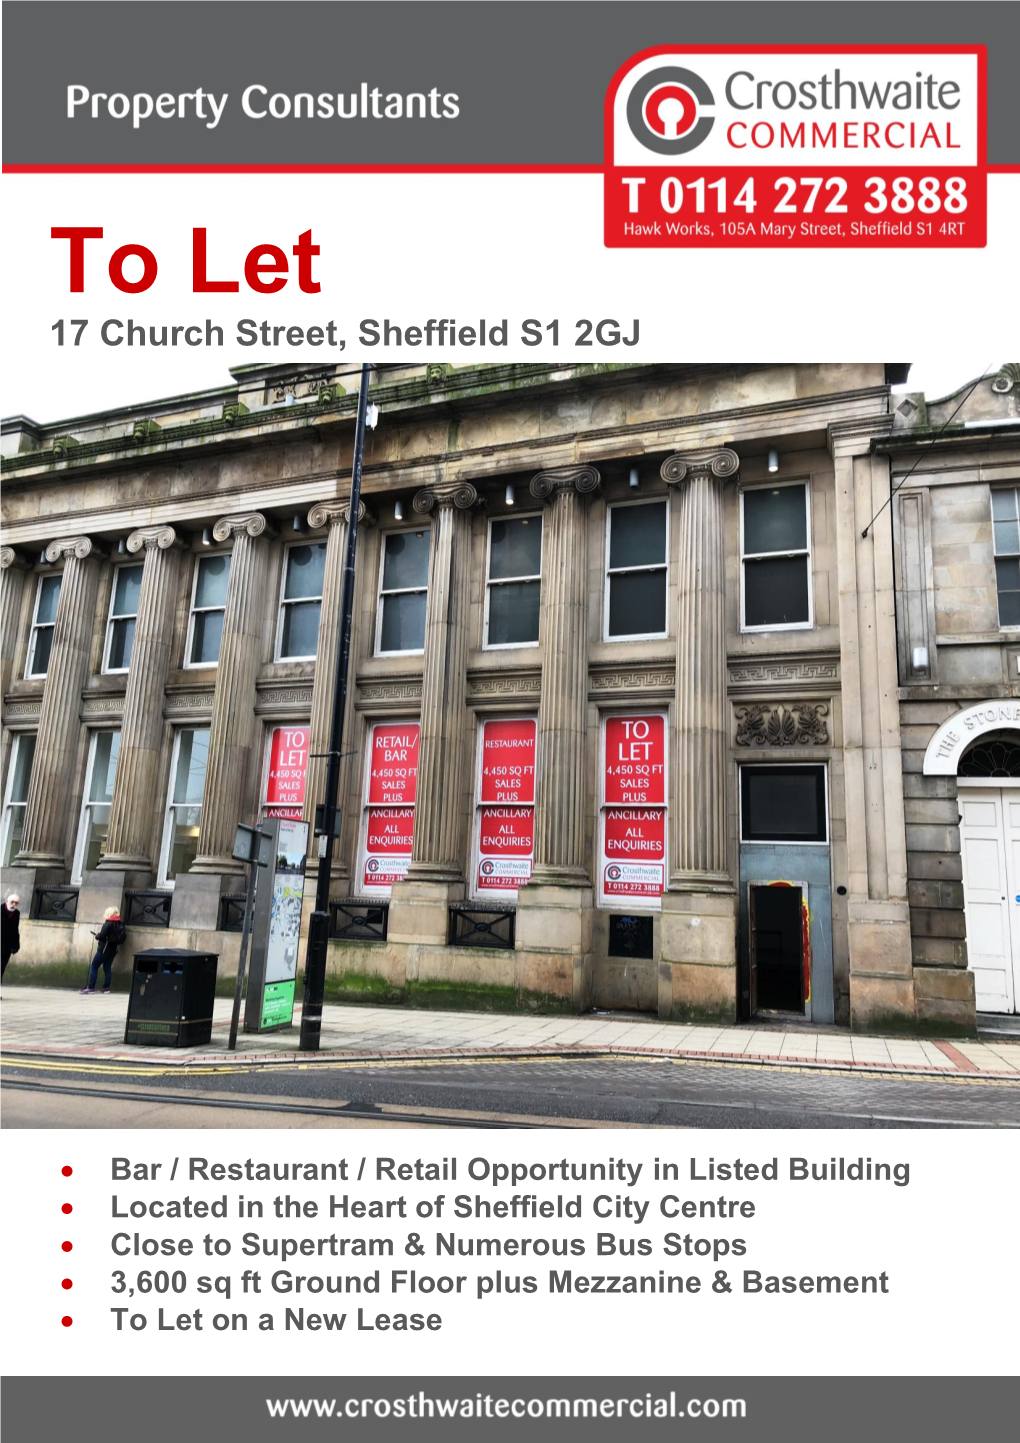 Bar / Restaurant / Retail Opportunity in Listed Building